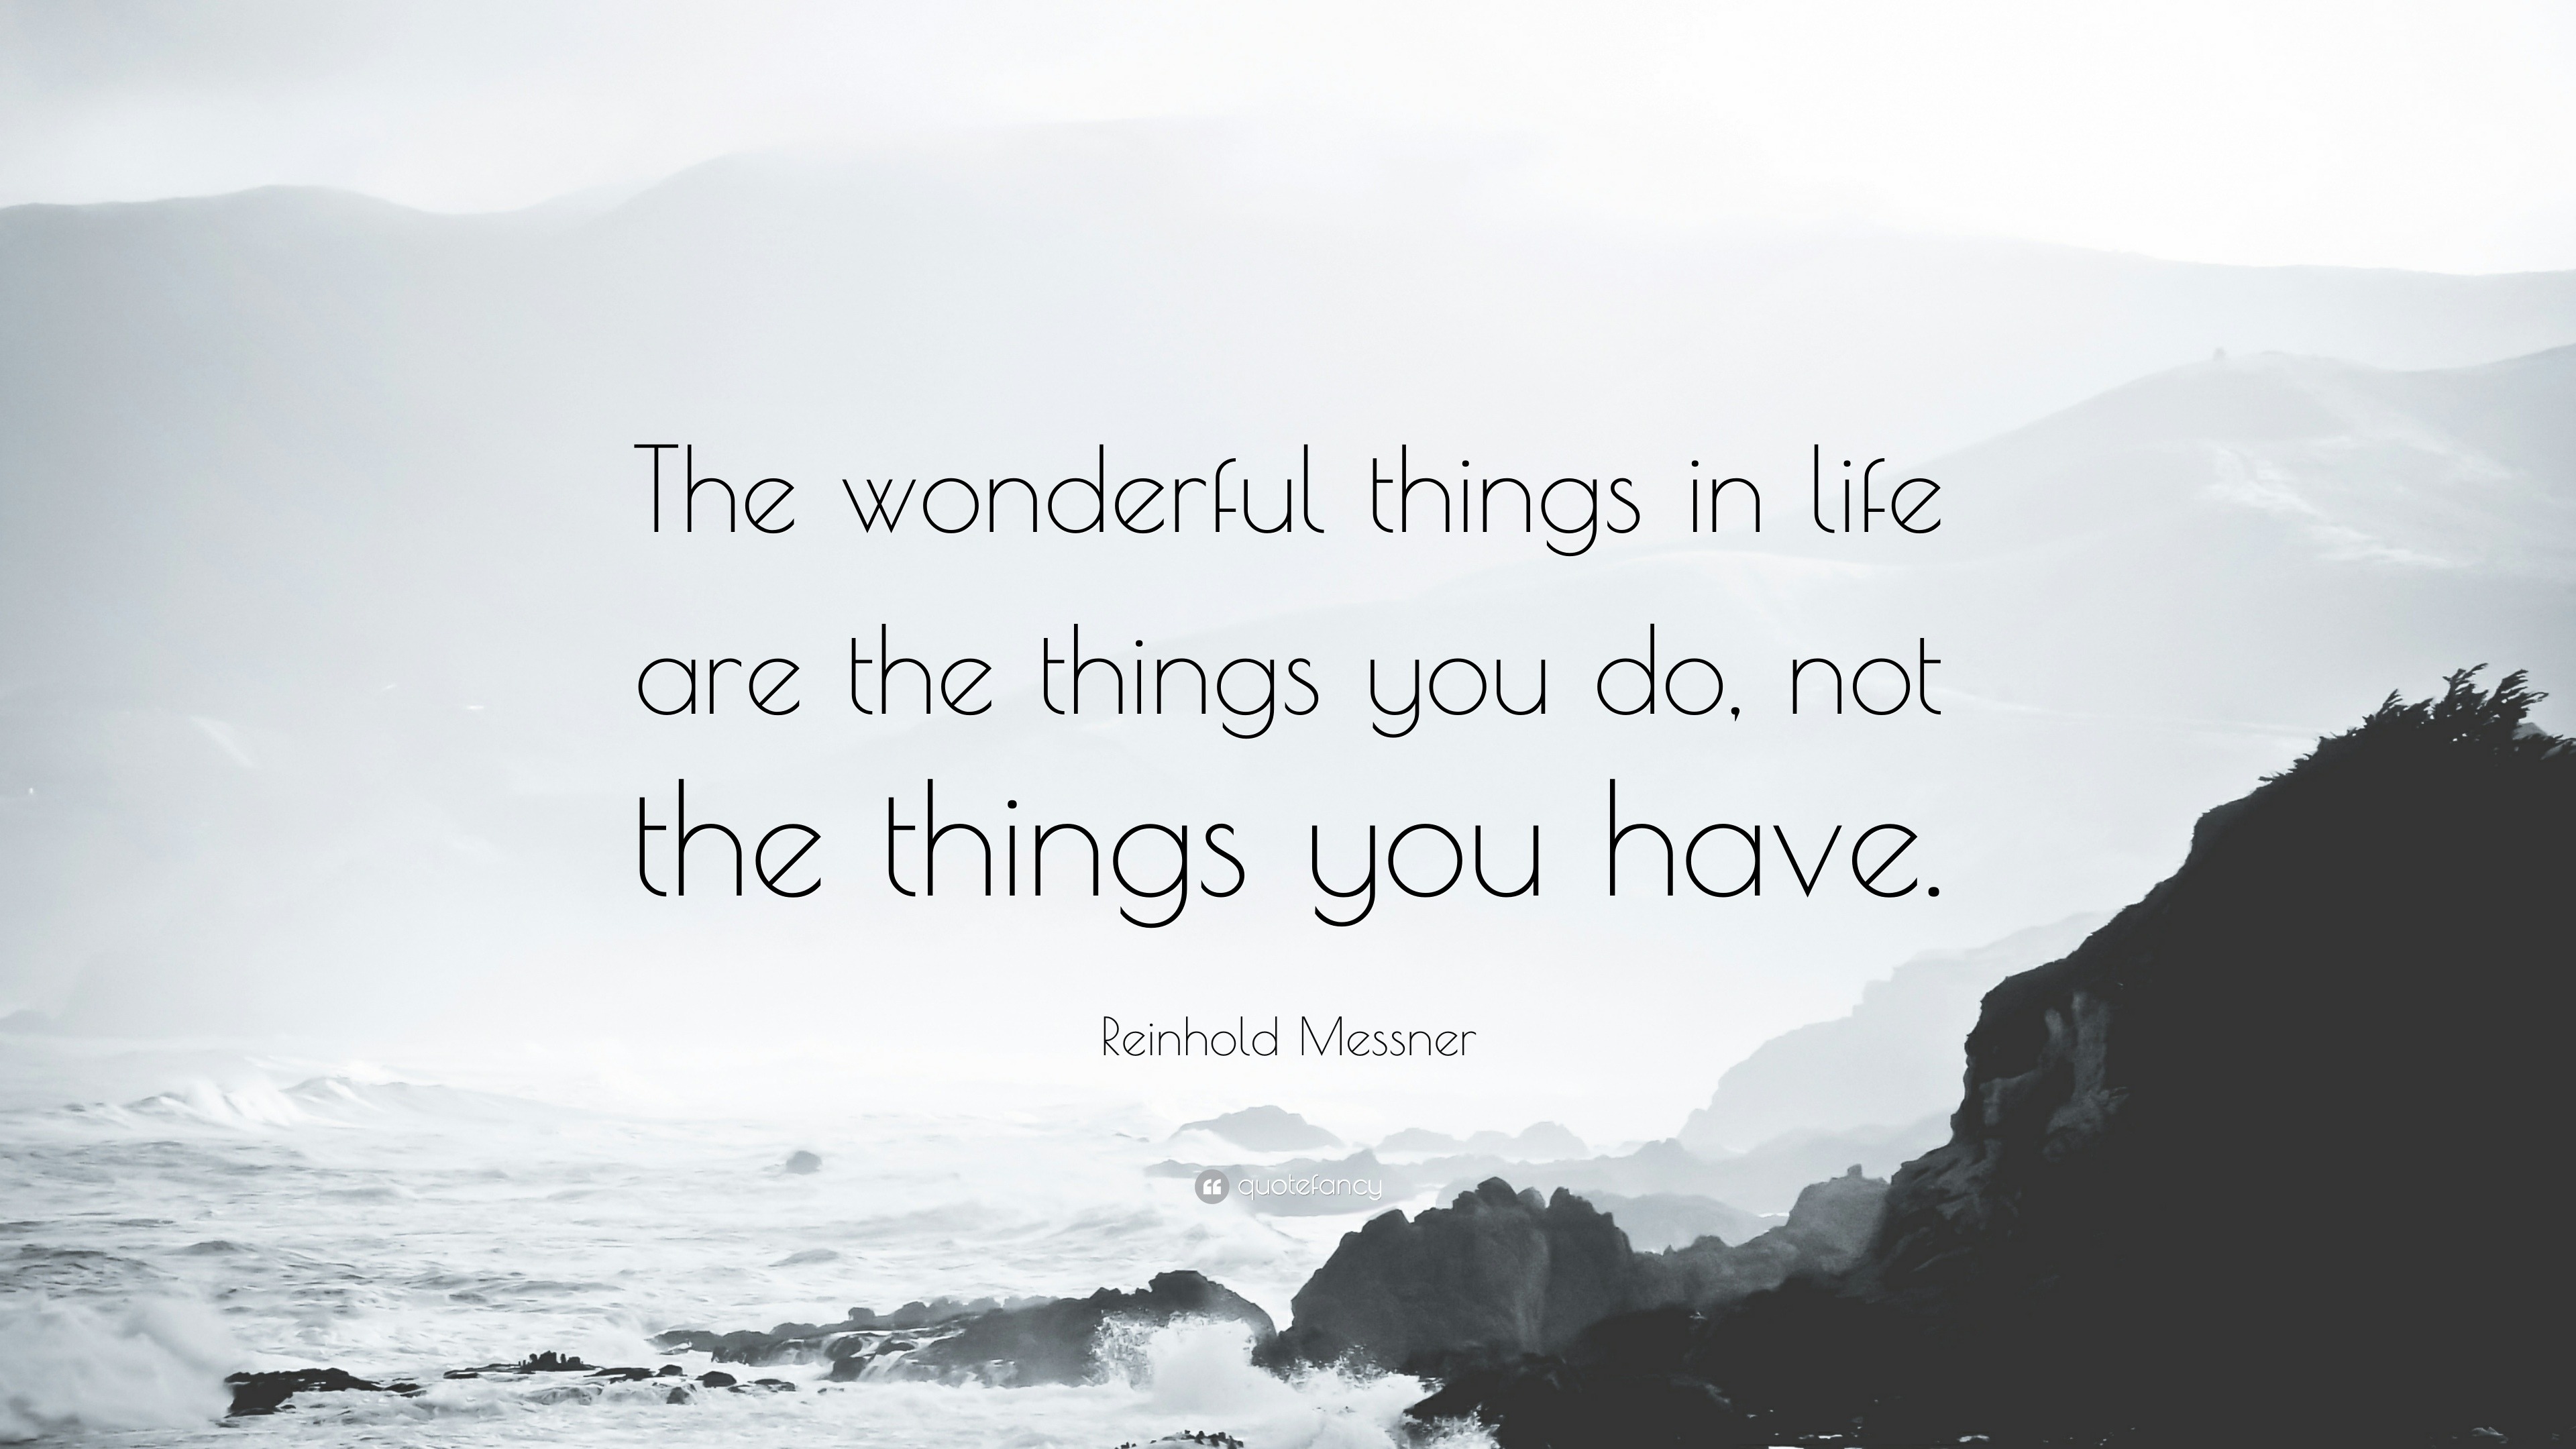 Reinhold Messner Quote: “The wonderful things in life are the things you  do, not the things